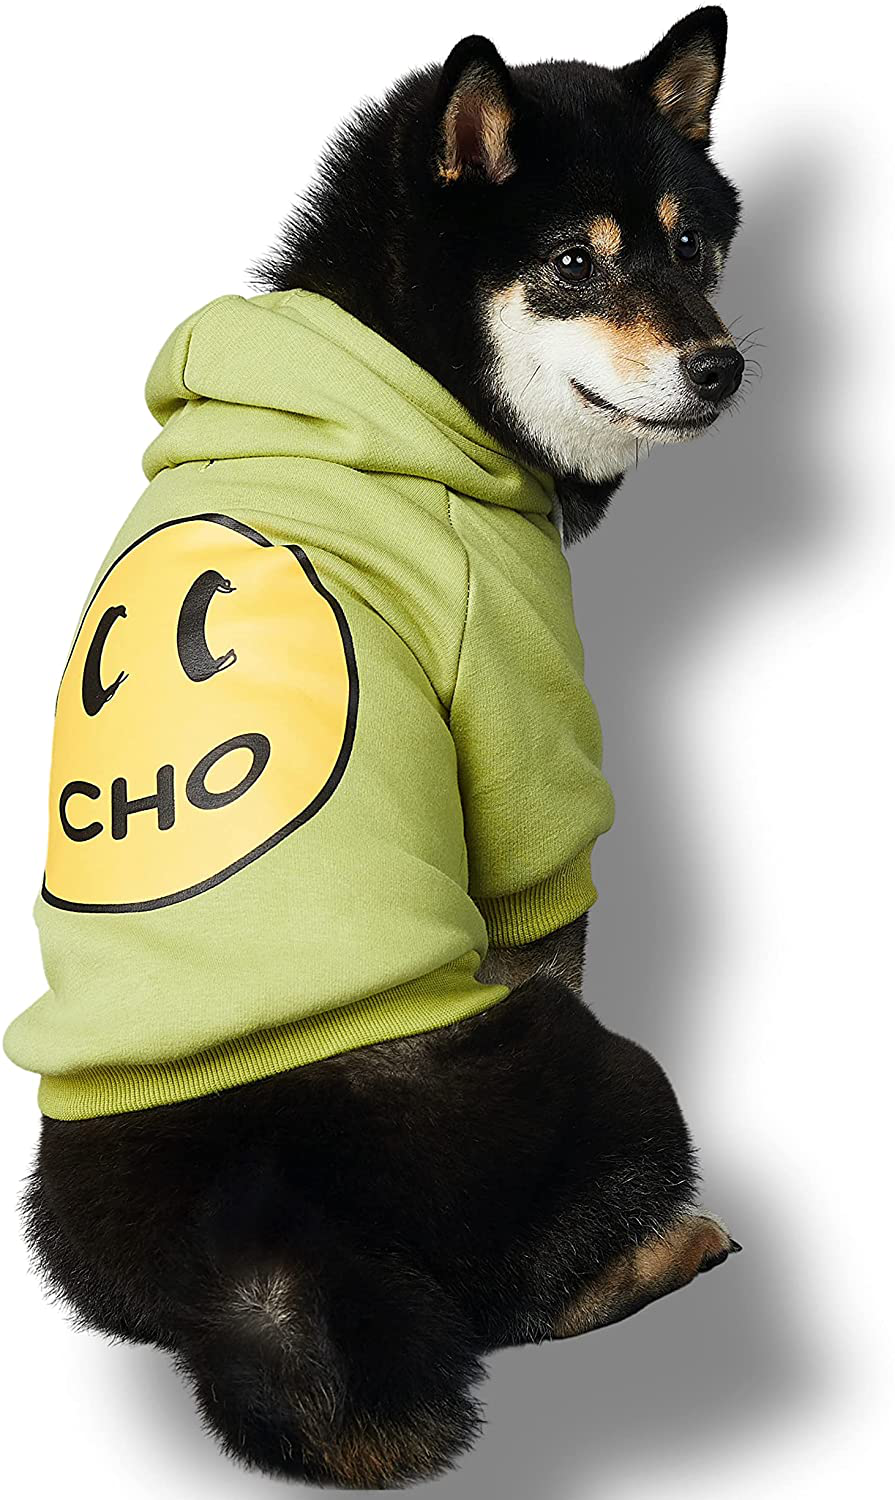 Chochocho Smile Dog Hoodie, Smiley Face Dog Sweater, Stylish Dog Clothes, Cotton Sweatshirt for Dogs and Puppies, Fashion Outfit for Dogs Cats Puppy Small Medium Large